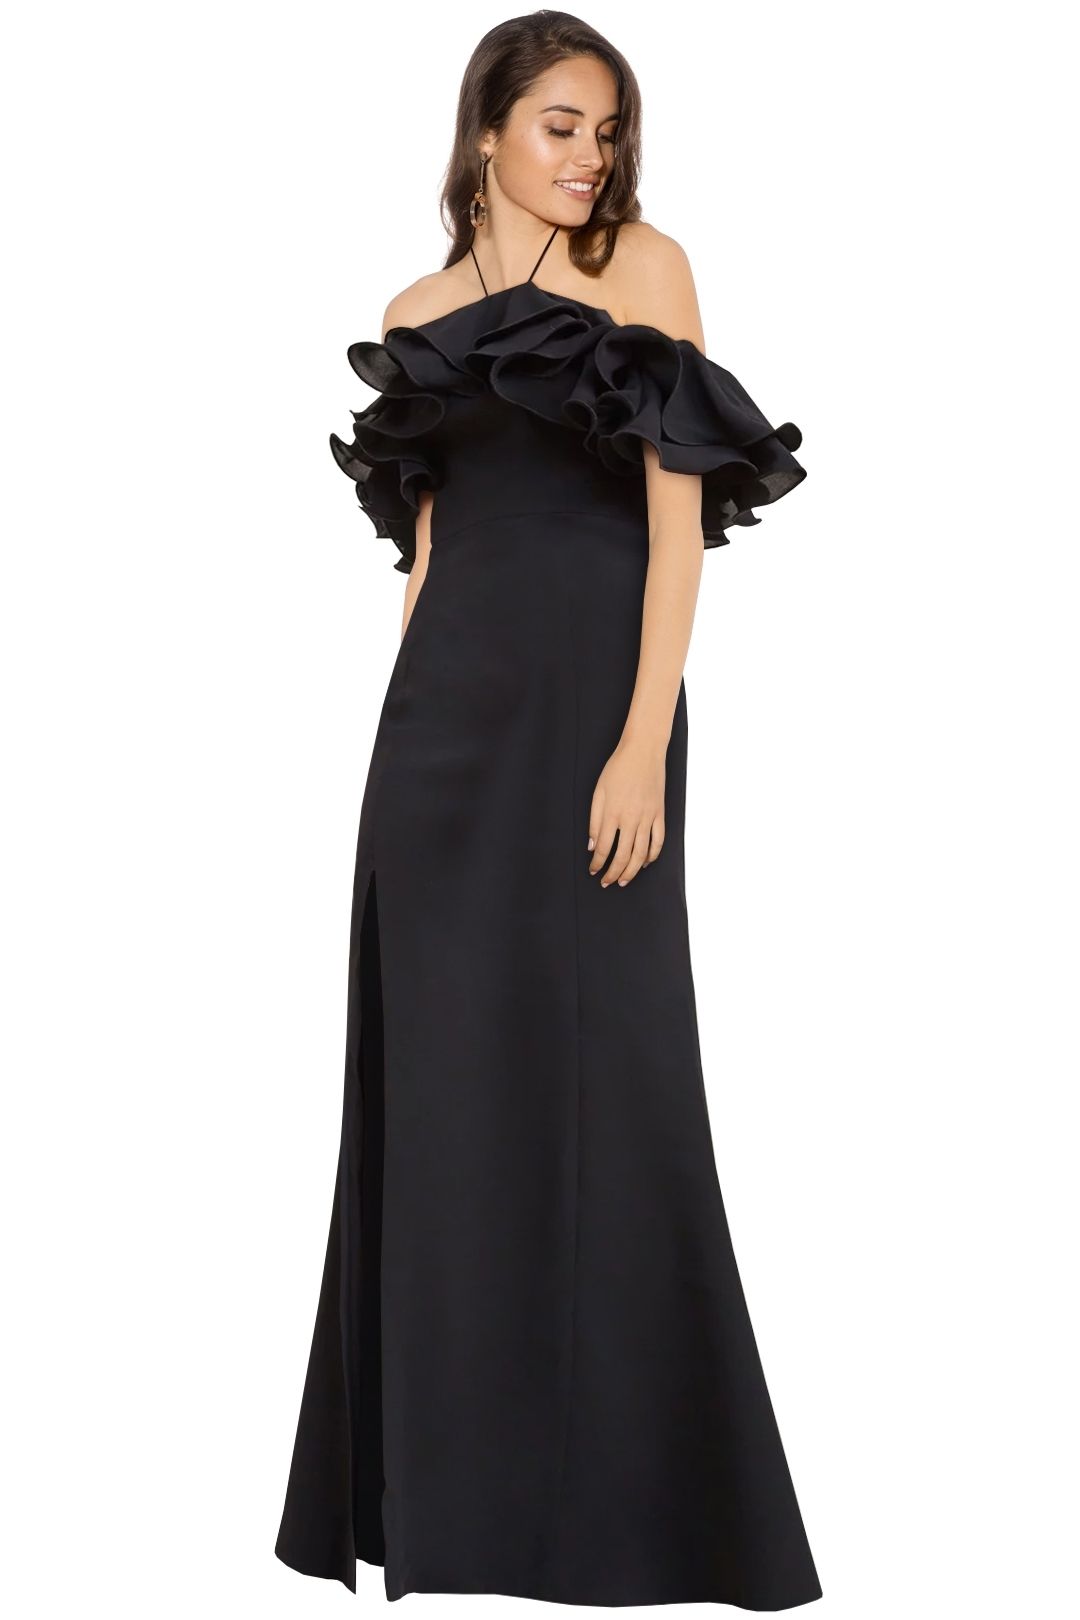 Cameo - Immerse Gown - Black - Side